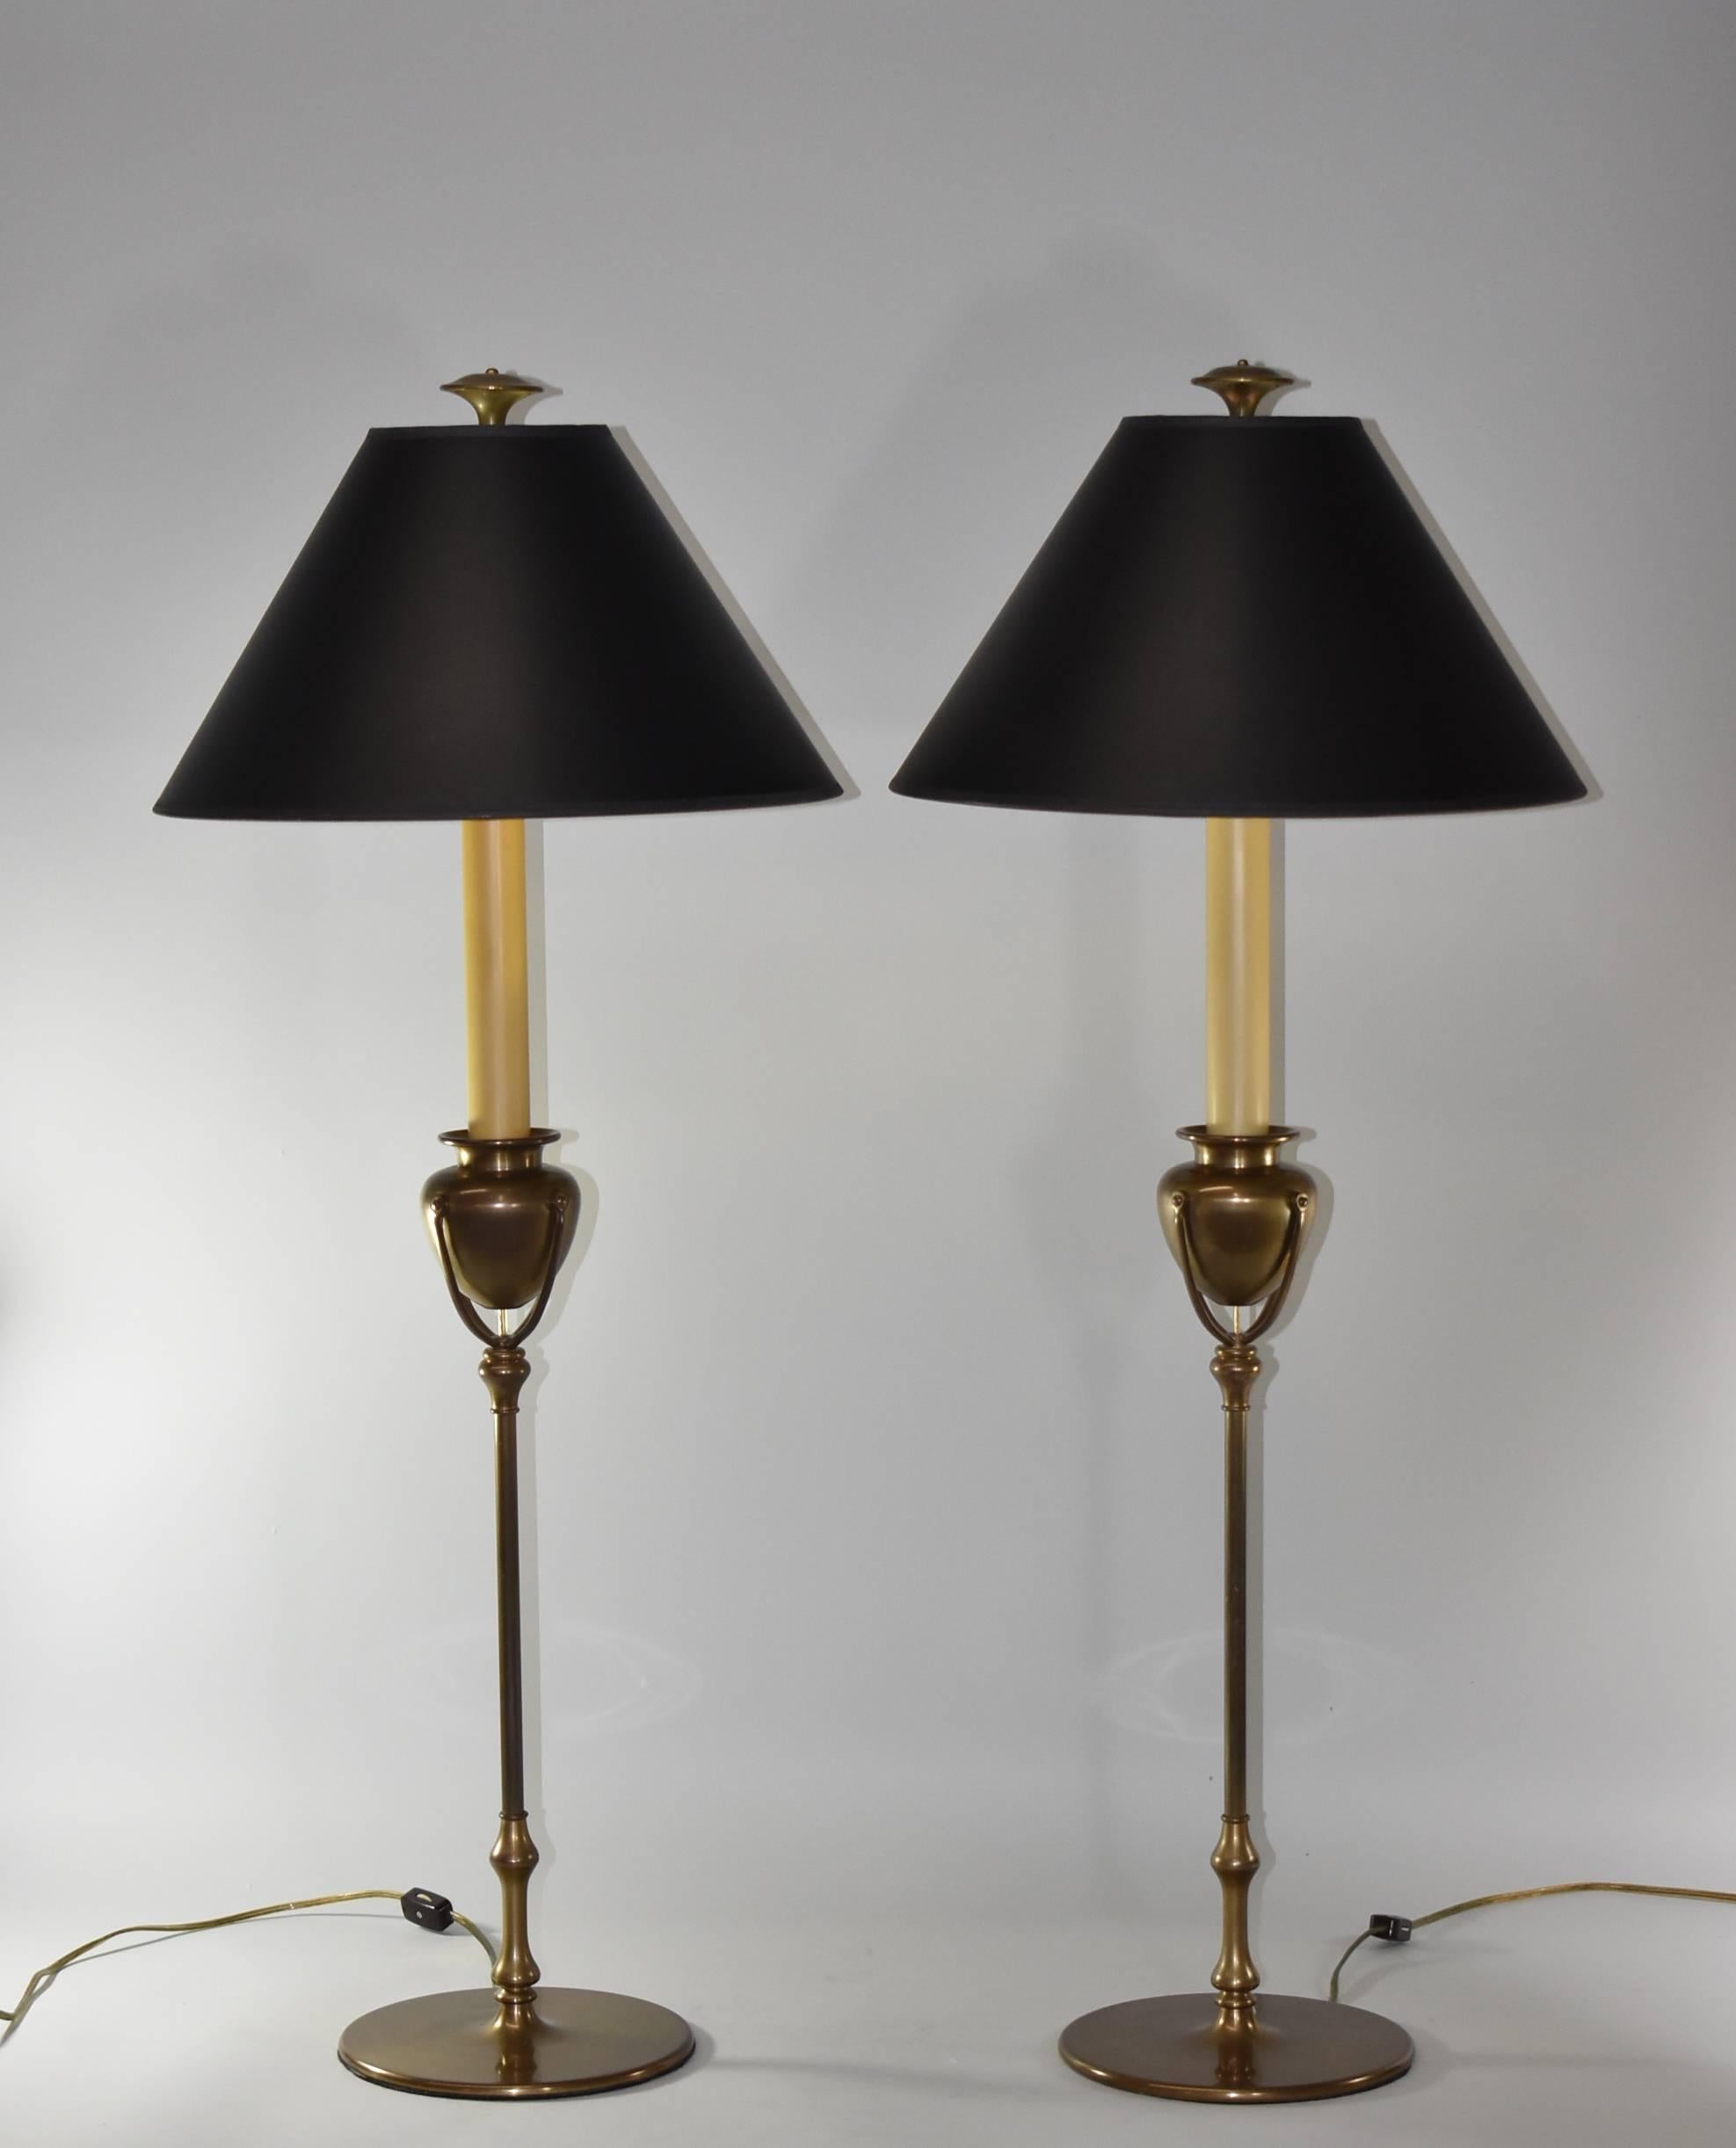 A lovely pair of brass buffet lamps by Chapman, 1985. These beautiful lamps feature a slender round brass candlestick body with an urn form centre.